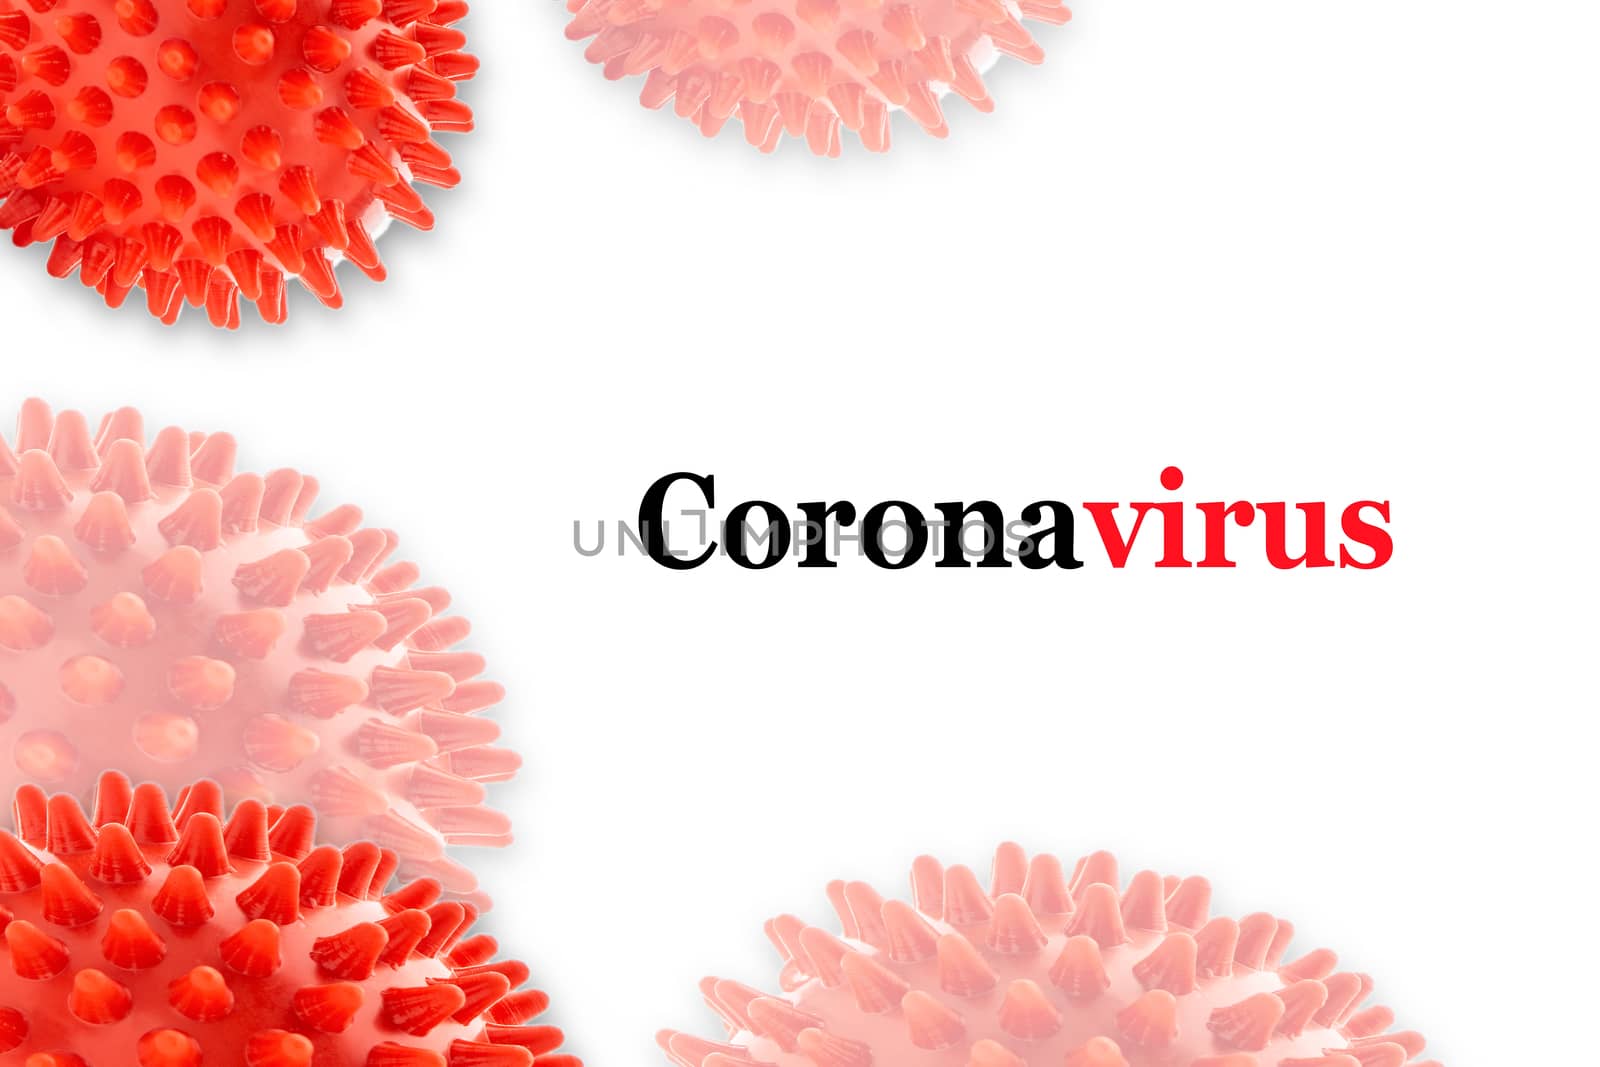 CORONAVIRUS text on white background. Covid-19 or Coronavirus concept by silverwings